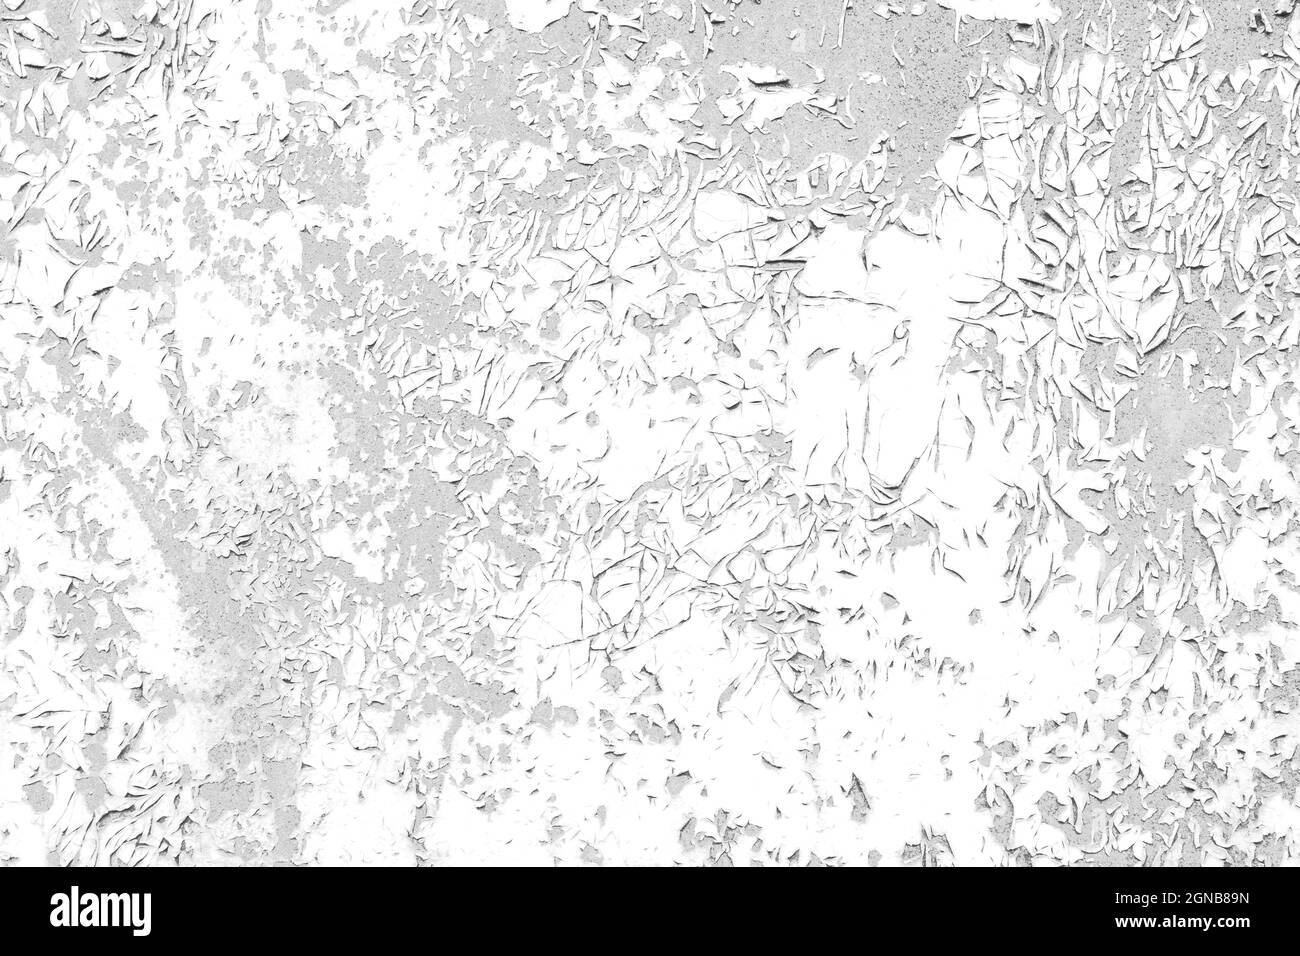 Distressed cracked paint damaged black and white grunge texture template for overlay artwork. Stock Photo